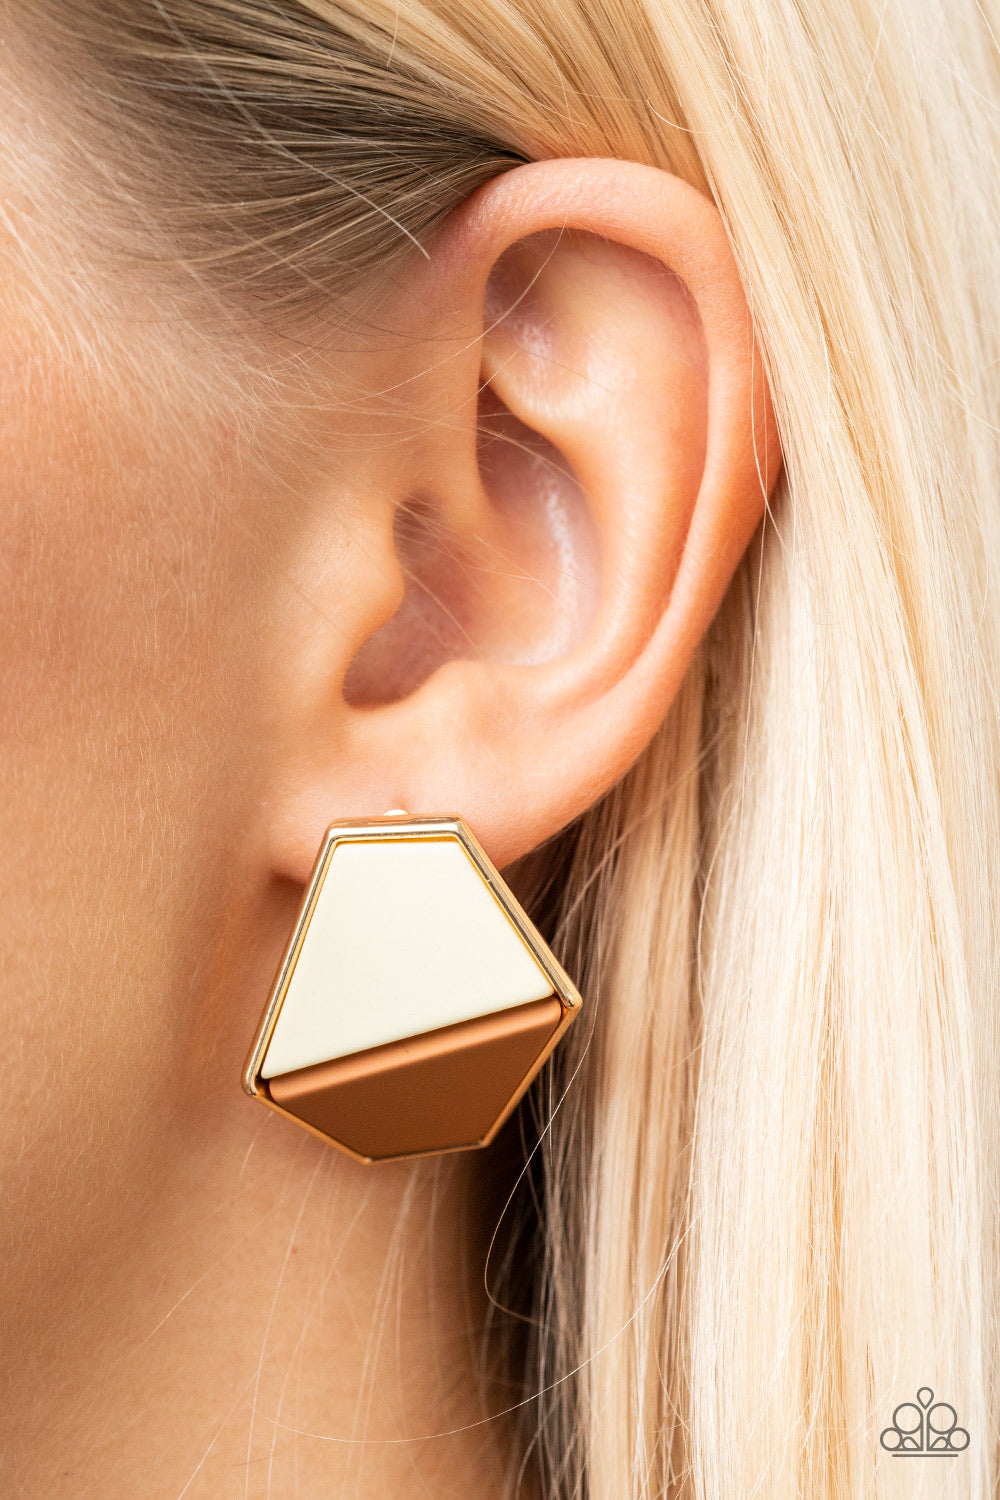 Paparazzi Accessories - Generically Geometric - Brown Earrings featuring a matte finish, white and brown trapezoidal frames are encased in a glistening gold frame that gently folds backwards for added dimension. Earring attaches to a standard post fitting.  Sold as one pair of post earrings.